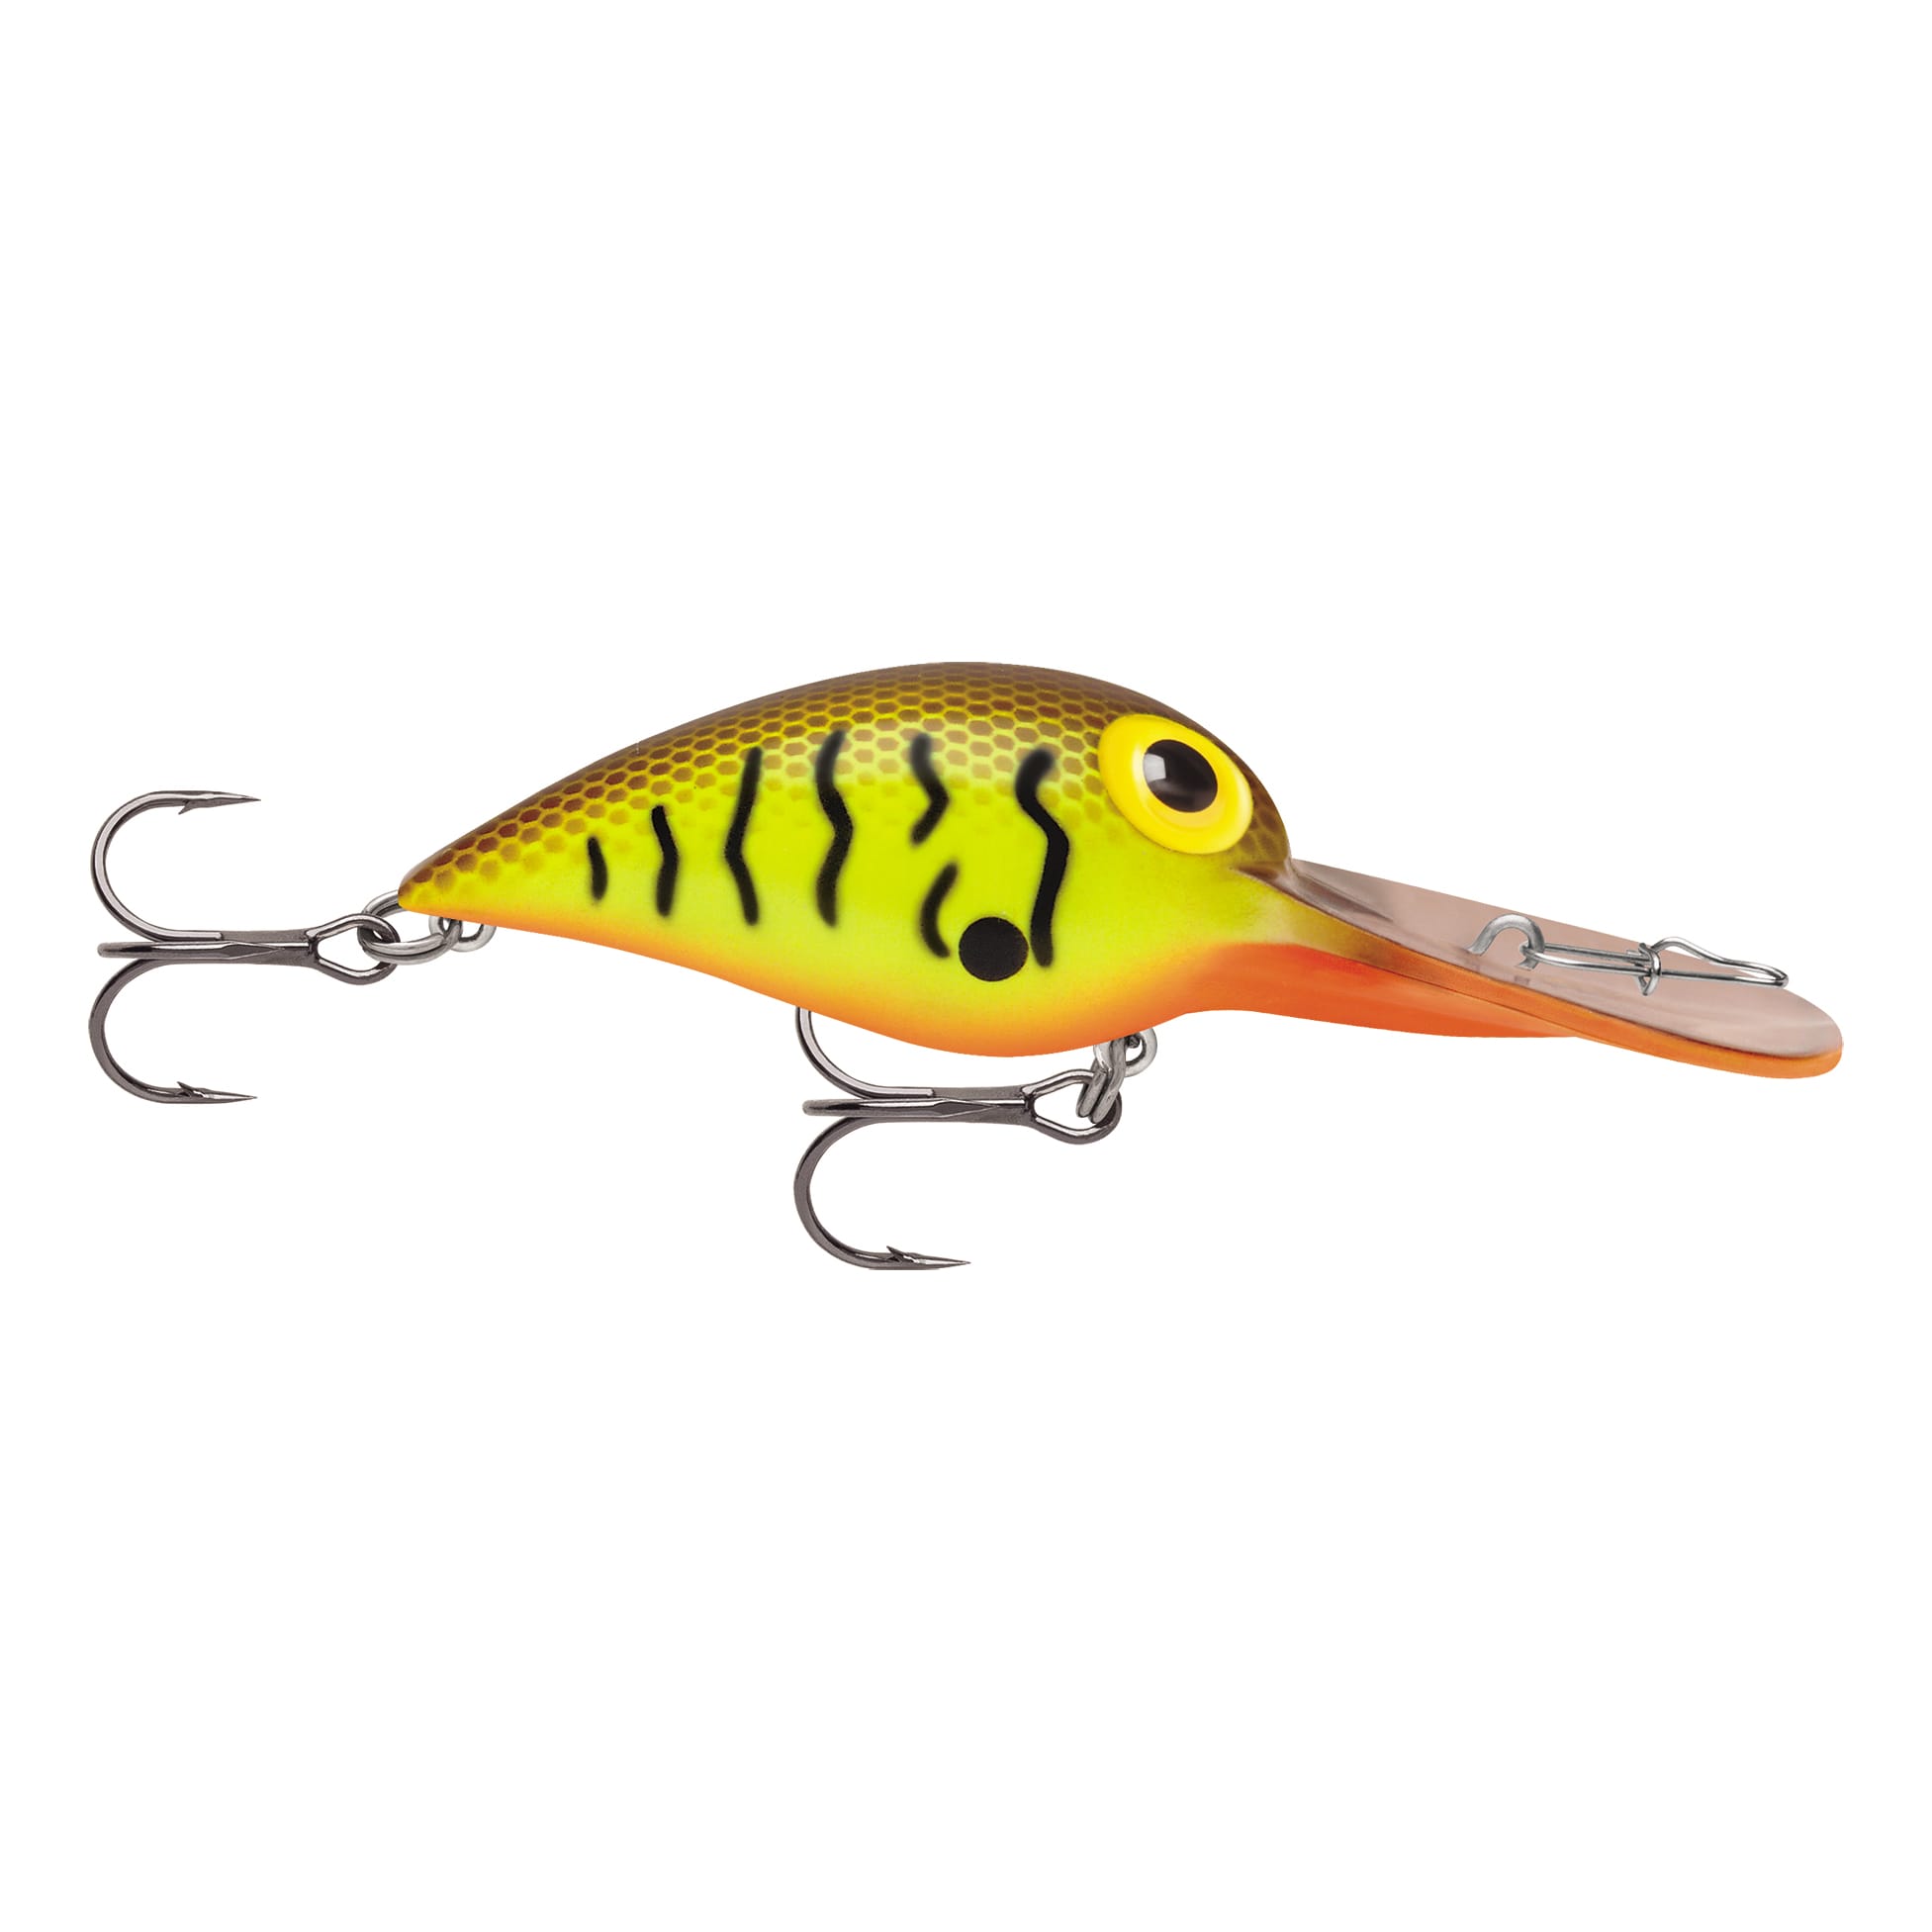 Storm® Wiggle Wart Deep - Scale Craw